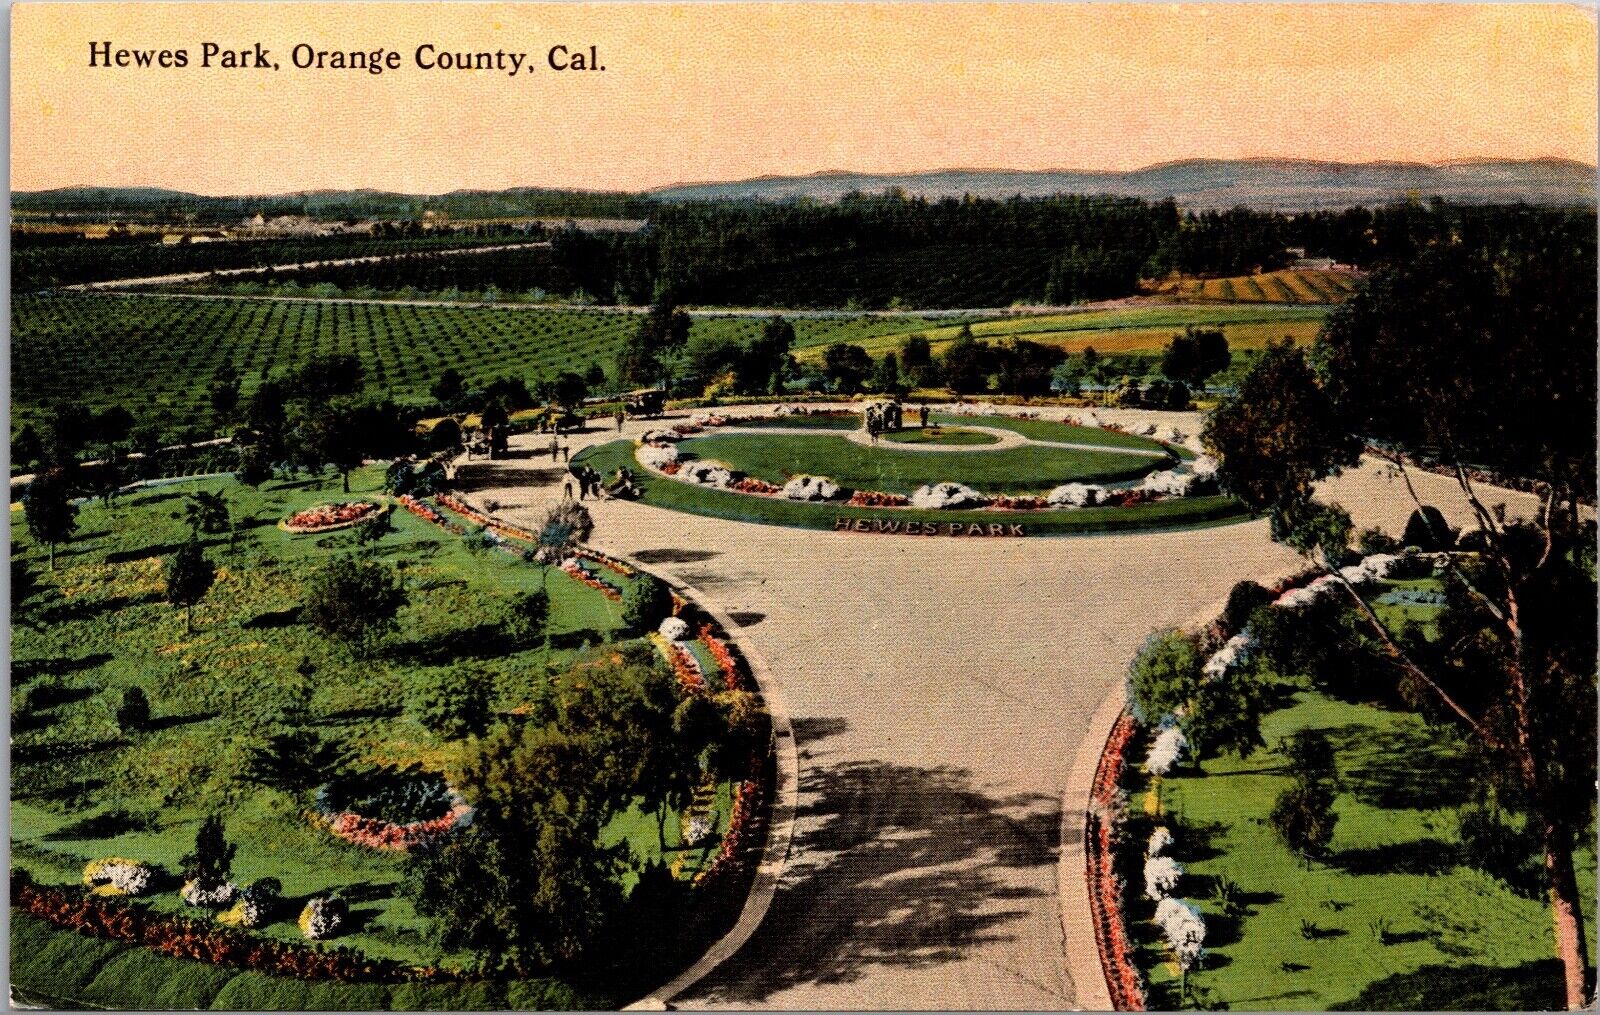 Postcard Overview of Hewes Park in Orange County, California